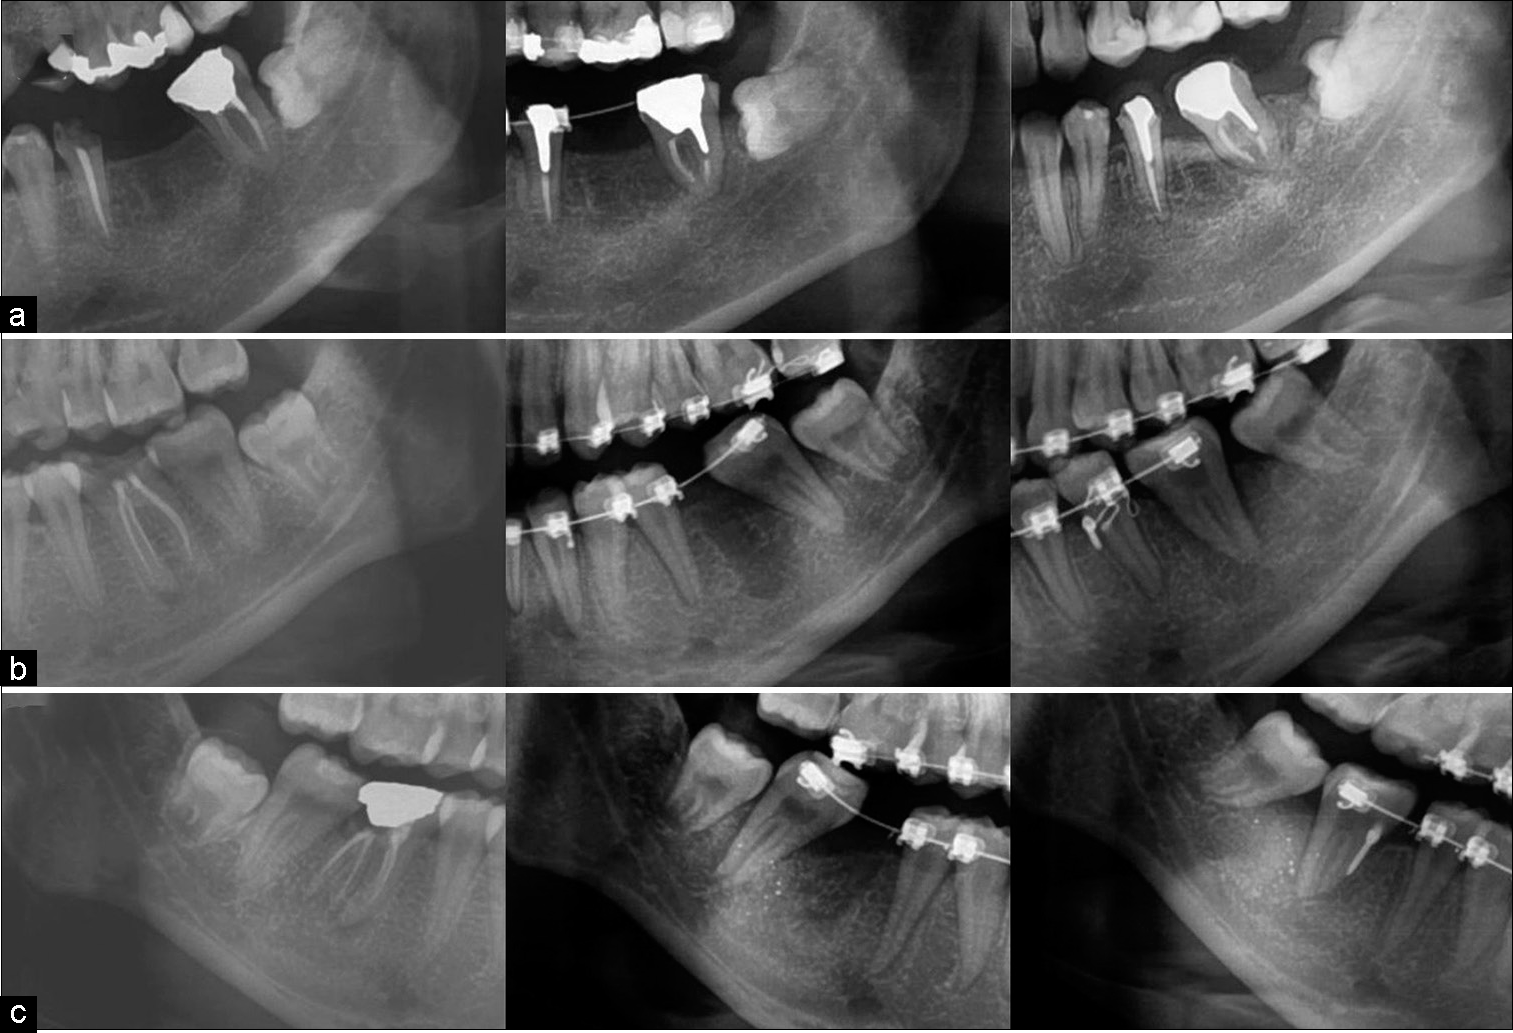 (a) No spontaneous eruption of the horizontally impacted third molar after second molar protraction. (b and c) Spontaneous eruption of the vertically impacted third molar.